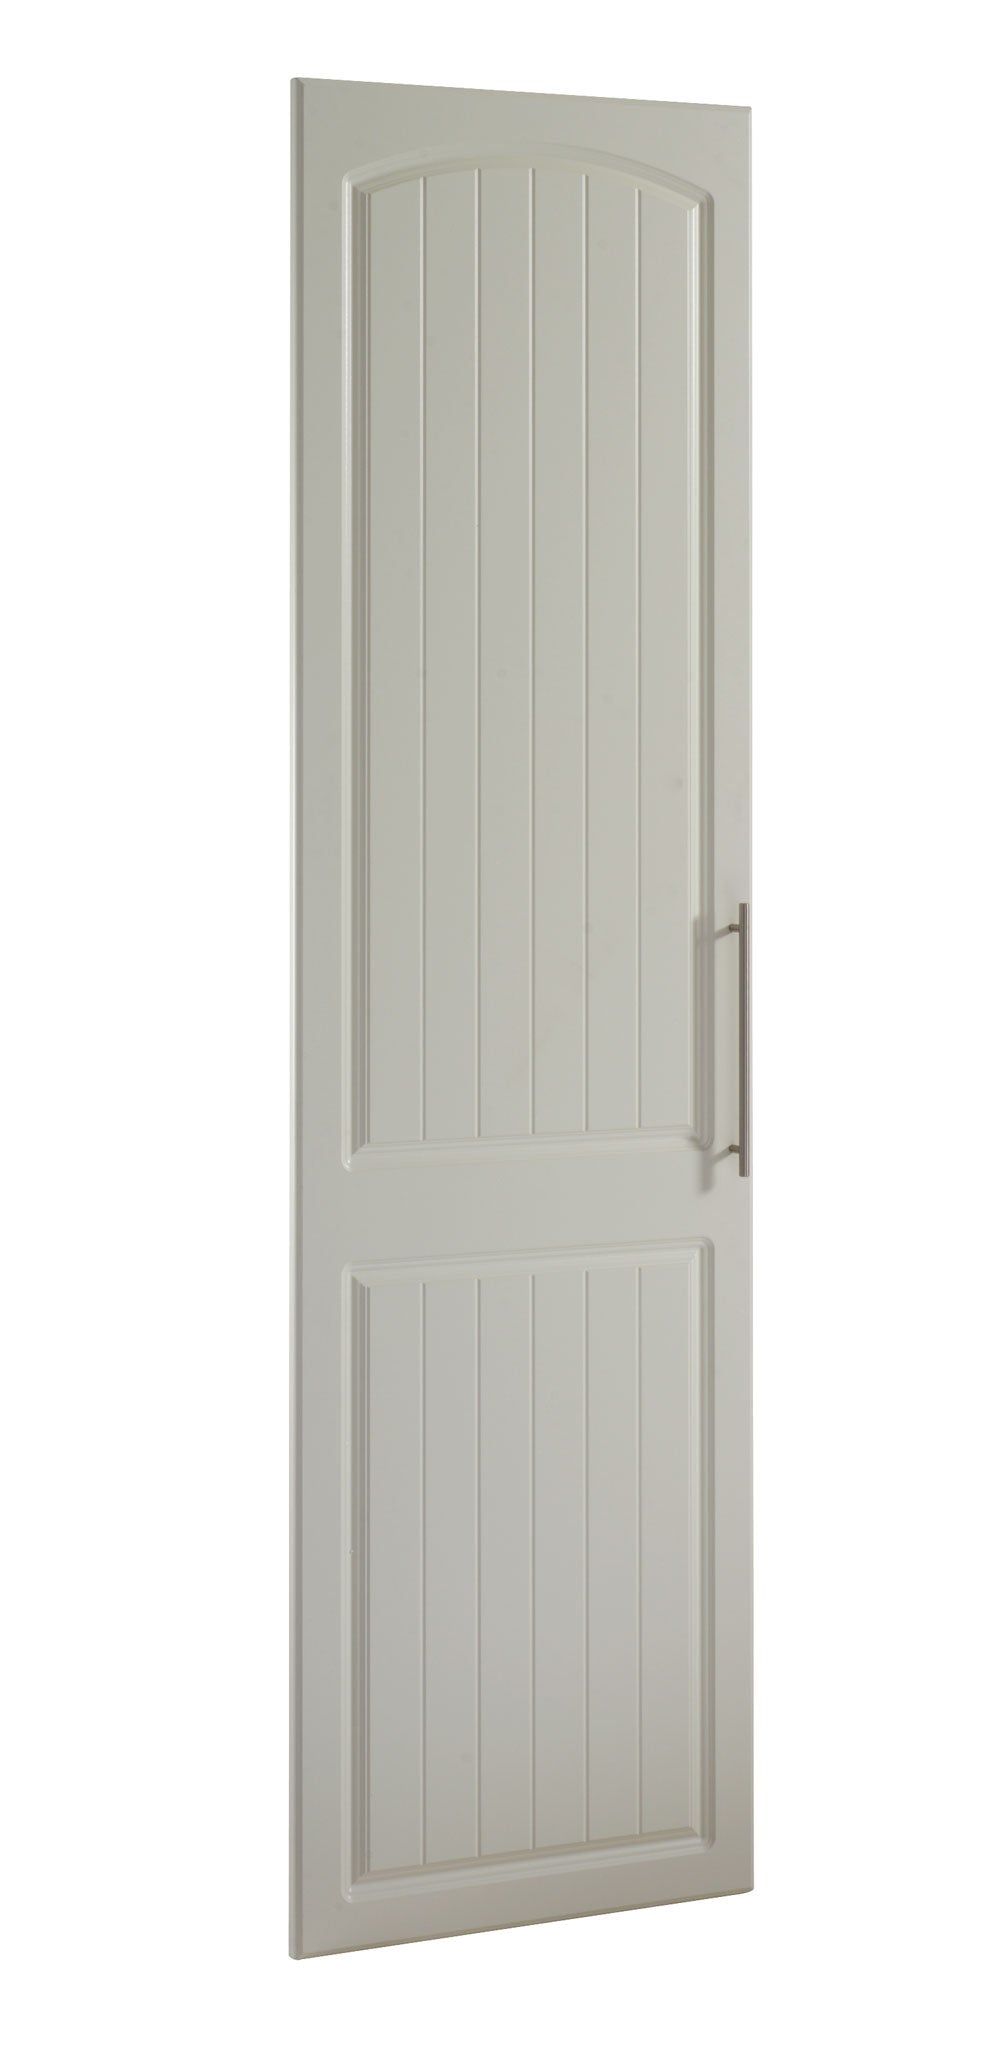 Made to measure cotton style door in any colour